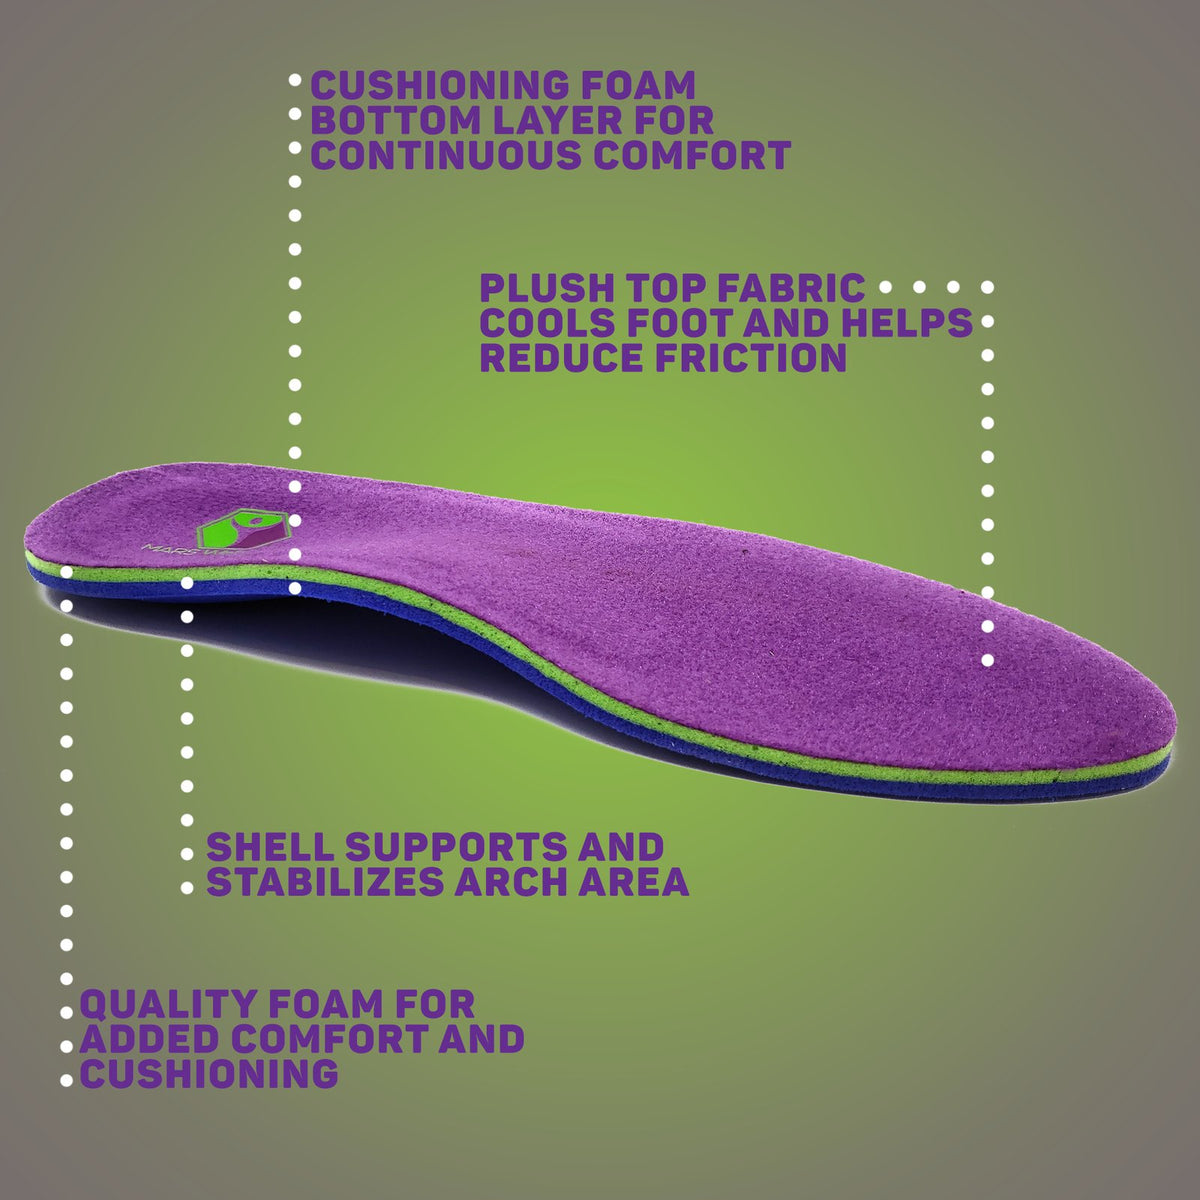 MARS WELLNESS POWERTRAQ Active Orthotic Medical Grade Low to Moderate Arch Support Orthopedic Orthotic Insoles - Plantar Fasciitis, Flat Feet, Foot Pain - by Mars Wellness - Medium